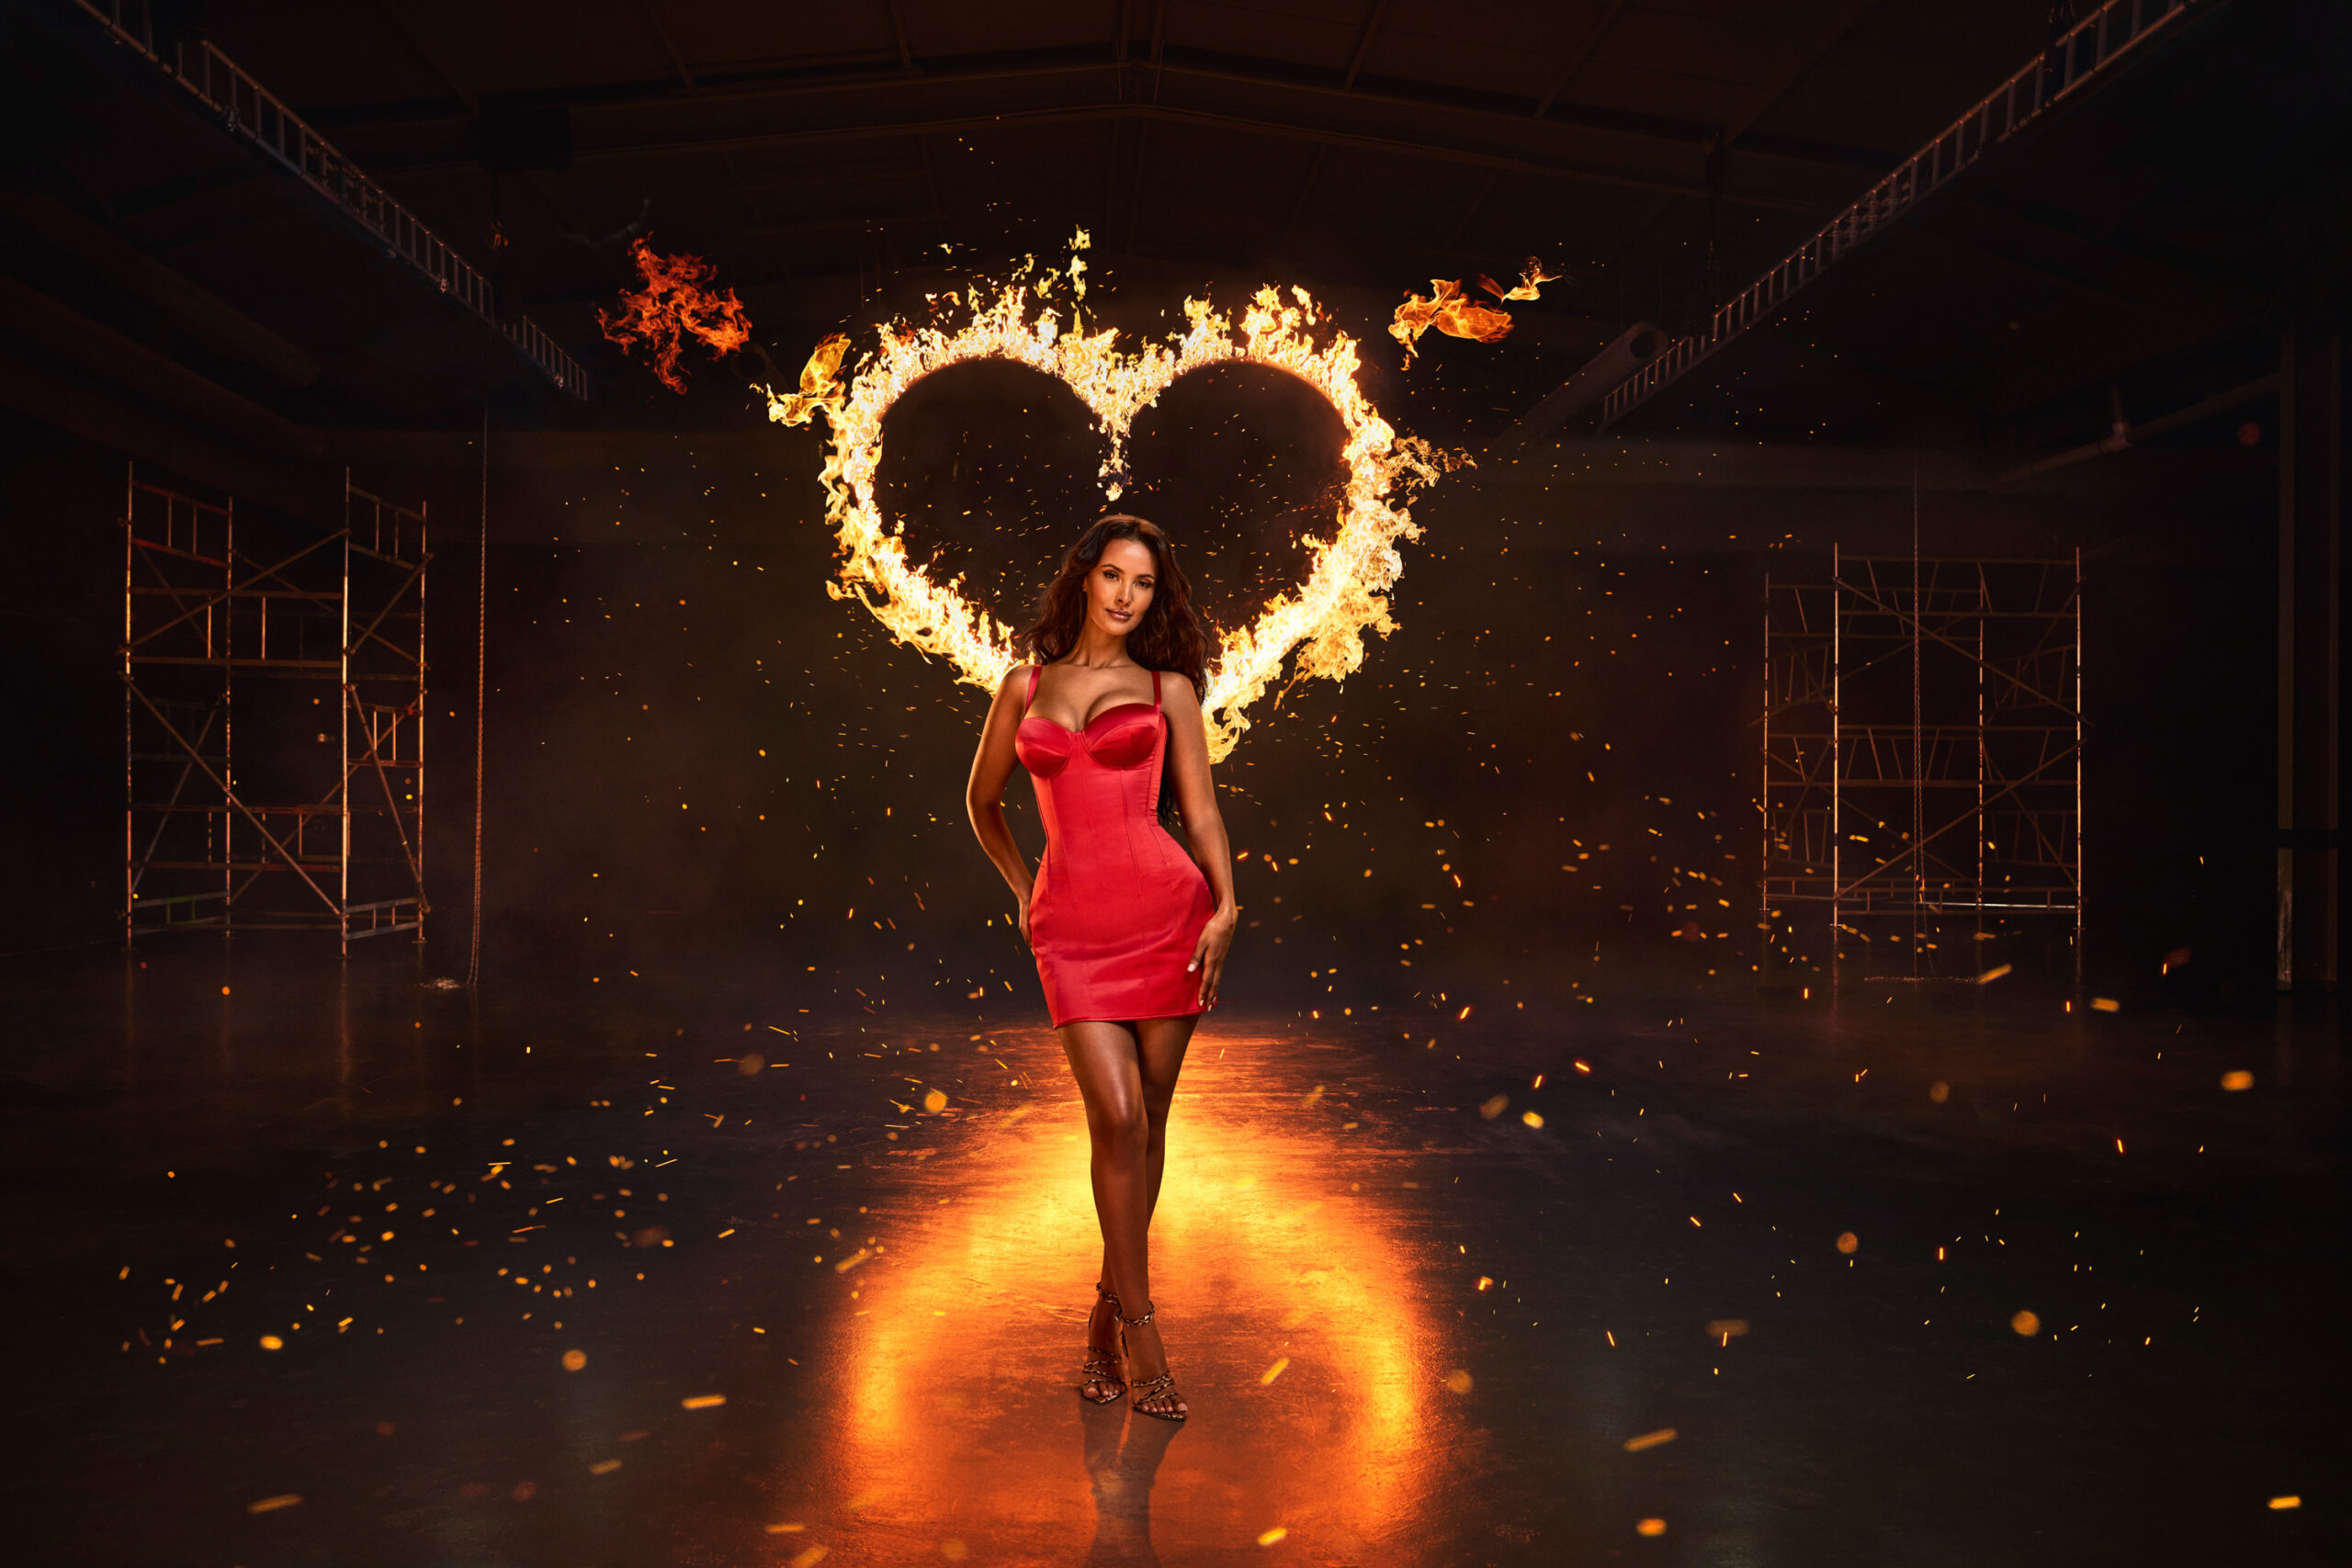 Love Island Series 11 shot by Ian Hippolyte. In the photograph, a mixed-race woman, Maya Jama, stands wearing a red cocktail dress, in a dark warehouse location. Behind her is flames in the shape of a love heart.